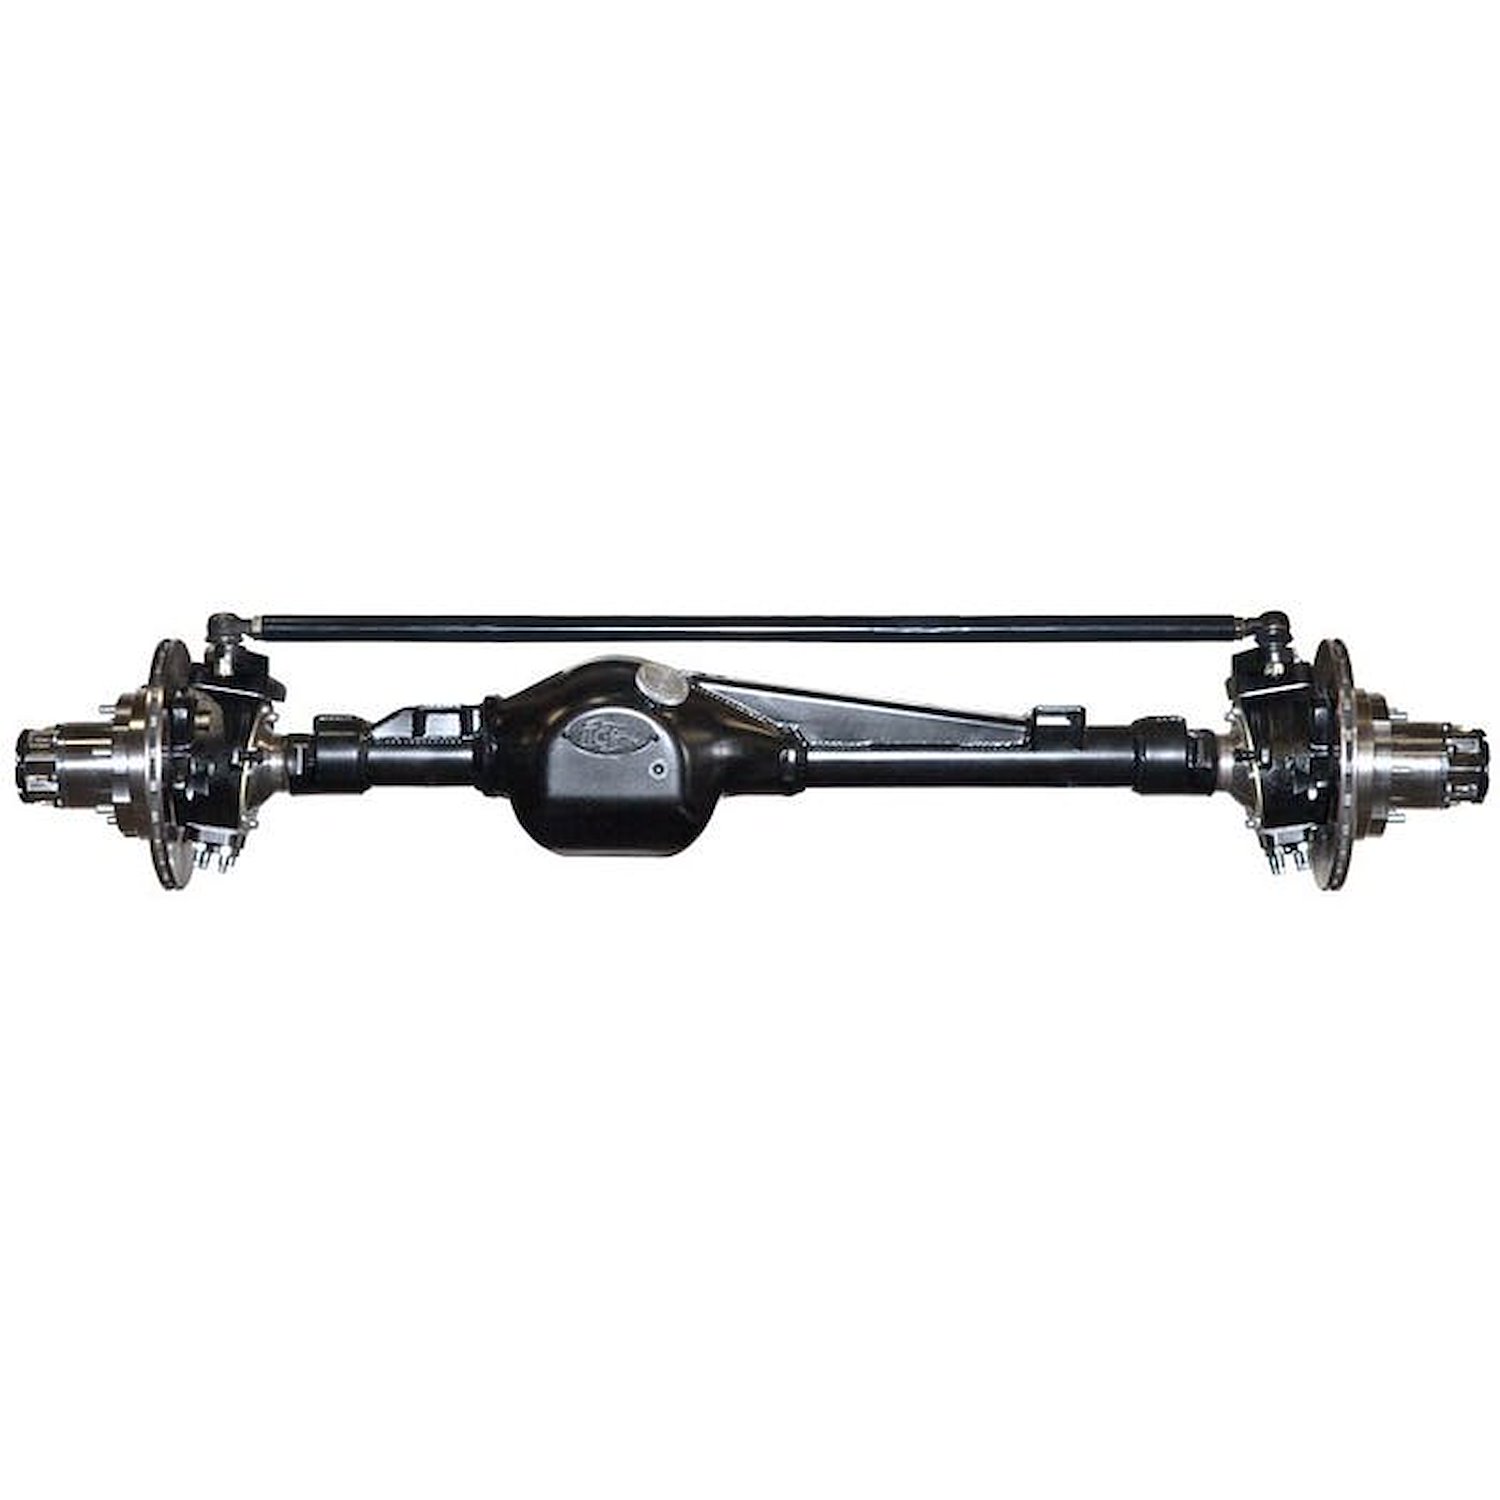 301614-1-KIT Rock Assault Fully-Built Front Axles, +3 Width, RHD, High-Pinion, 5.29, Grizzly, Creeper Flanges, Toyota